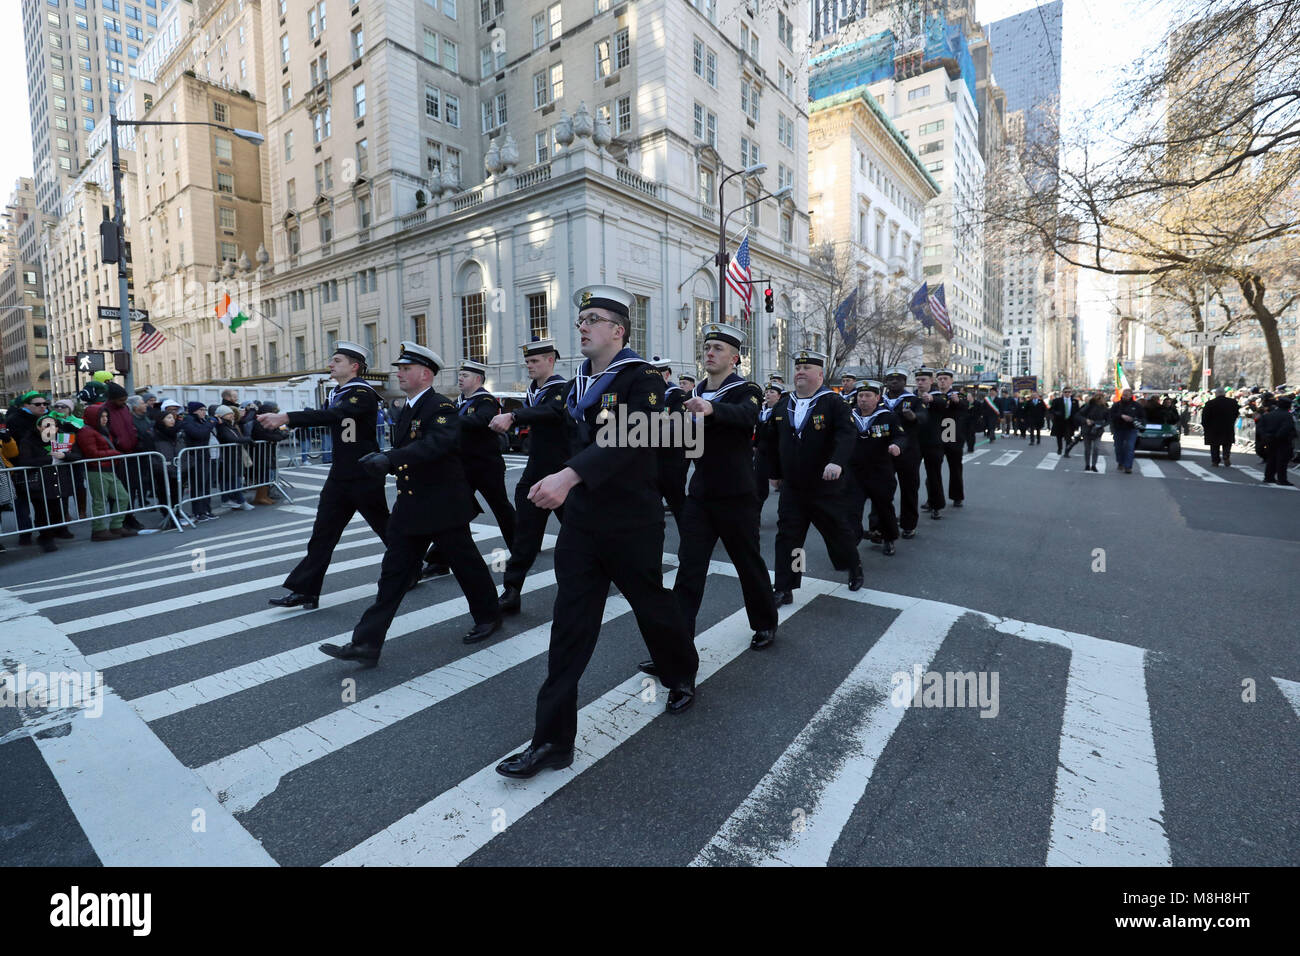 Members of the Irish Naval Reserve marching in the St Patrick's Day parade on 5th Avenue in New York City. Stock Photo